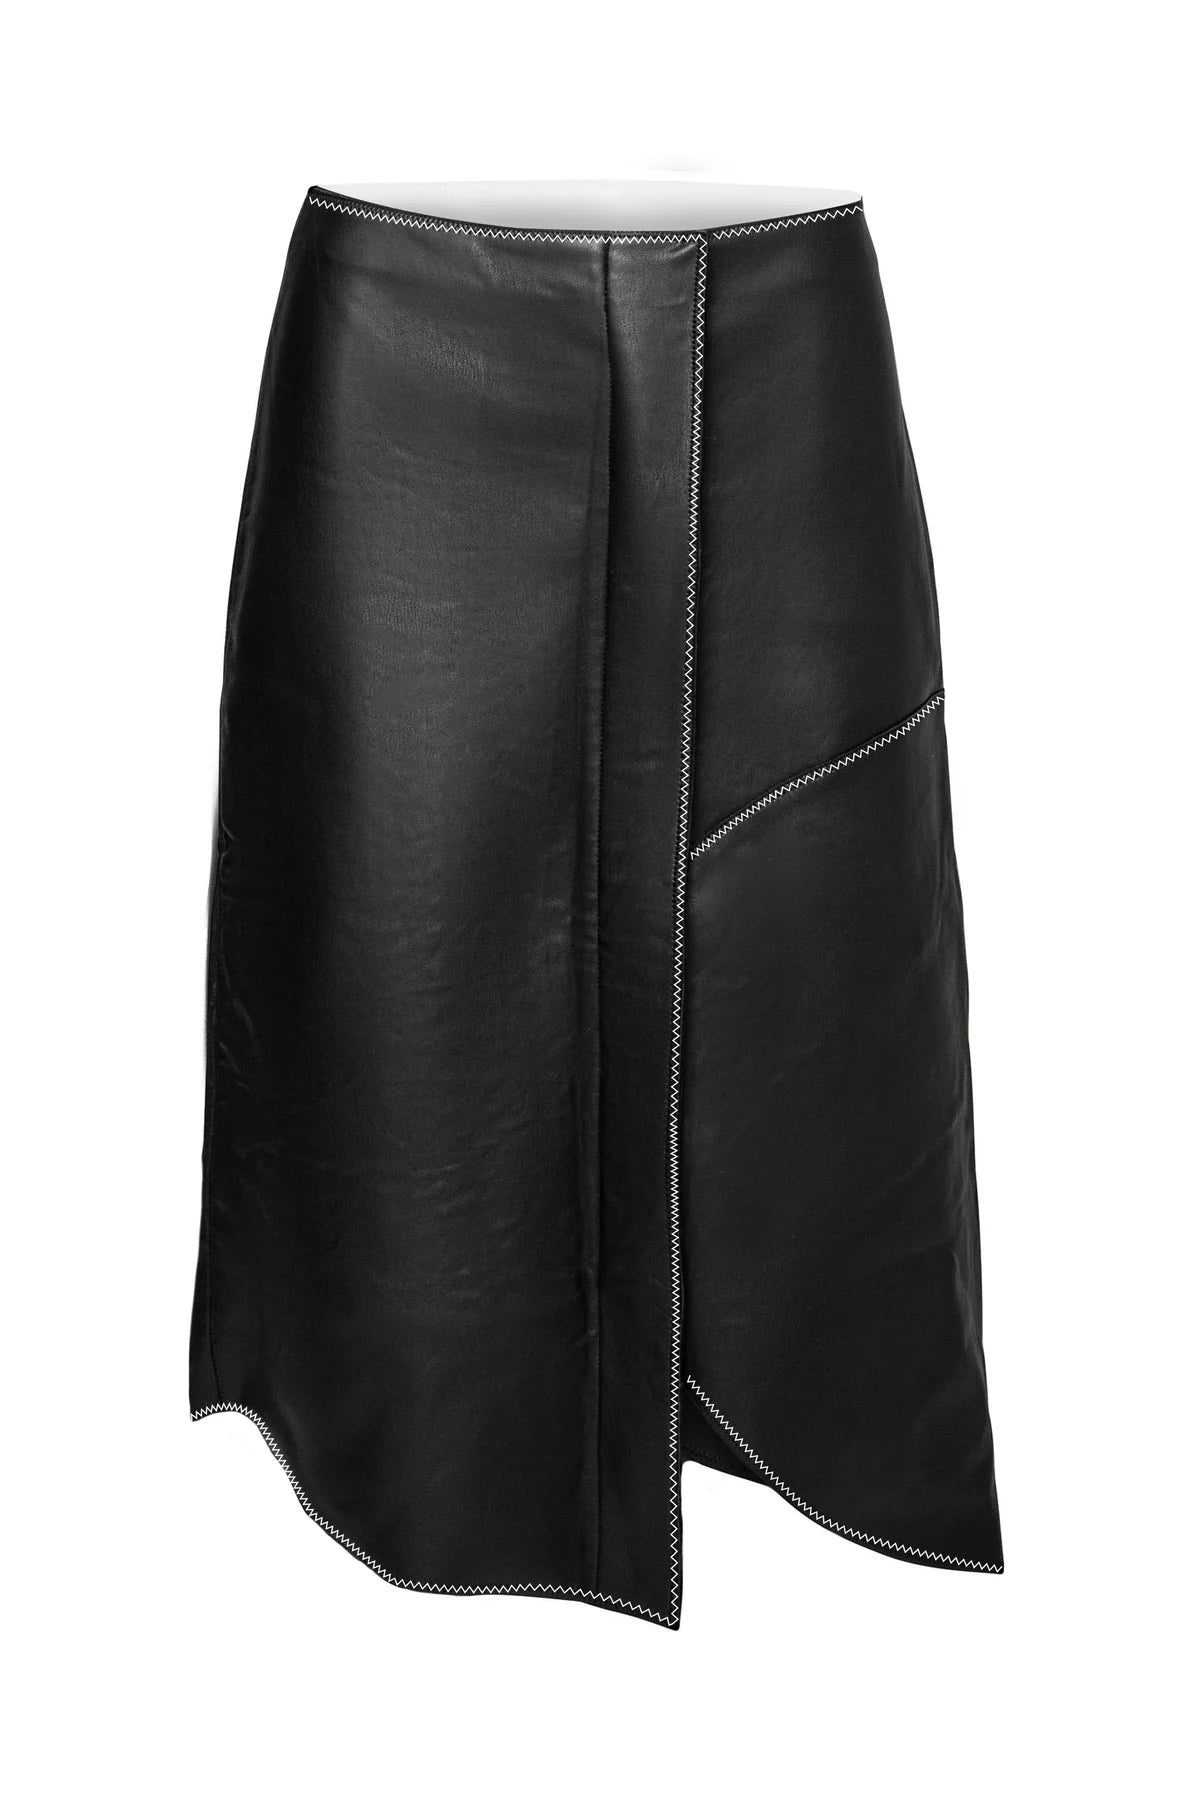 Lounge The Label Faux Leather Wrap Skirt - Corinth